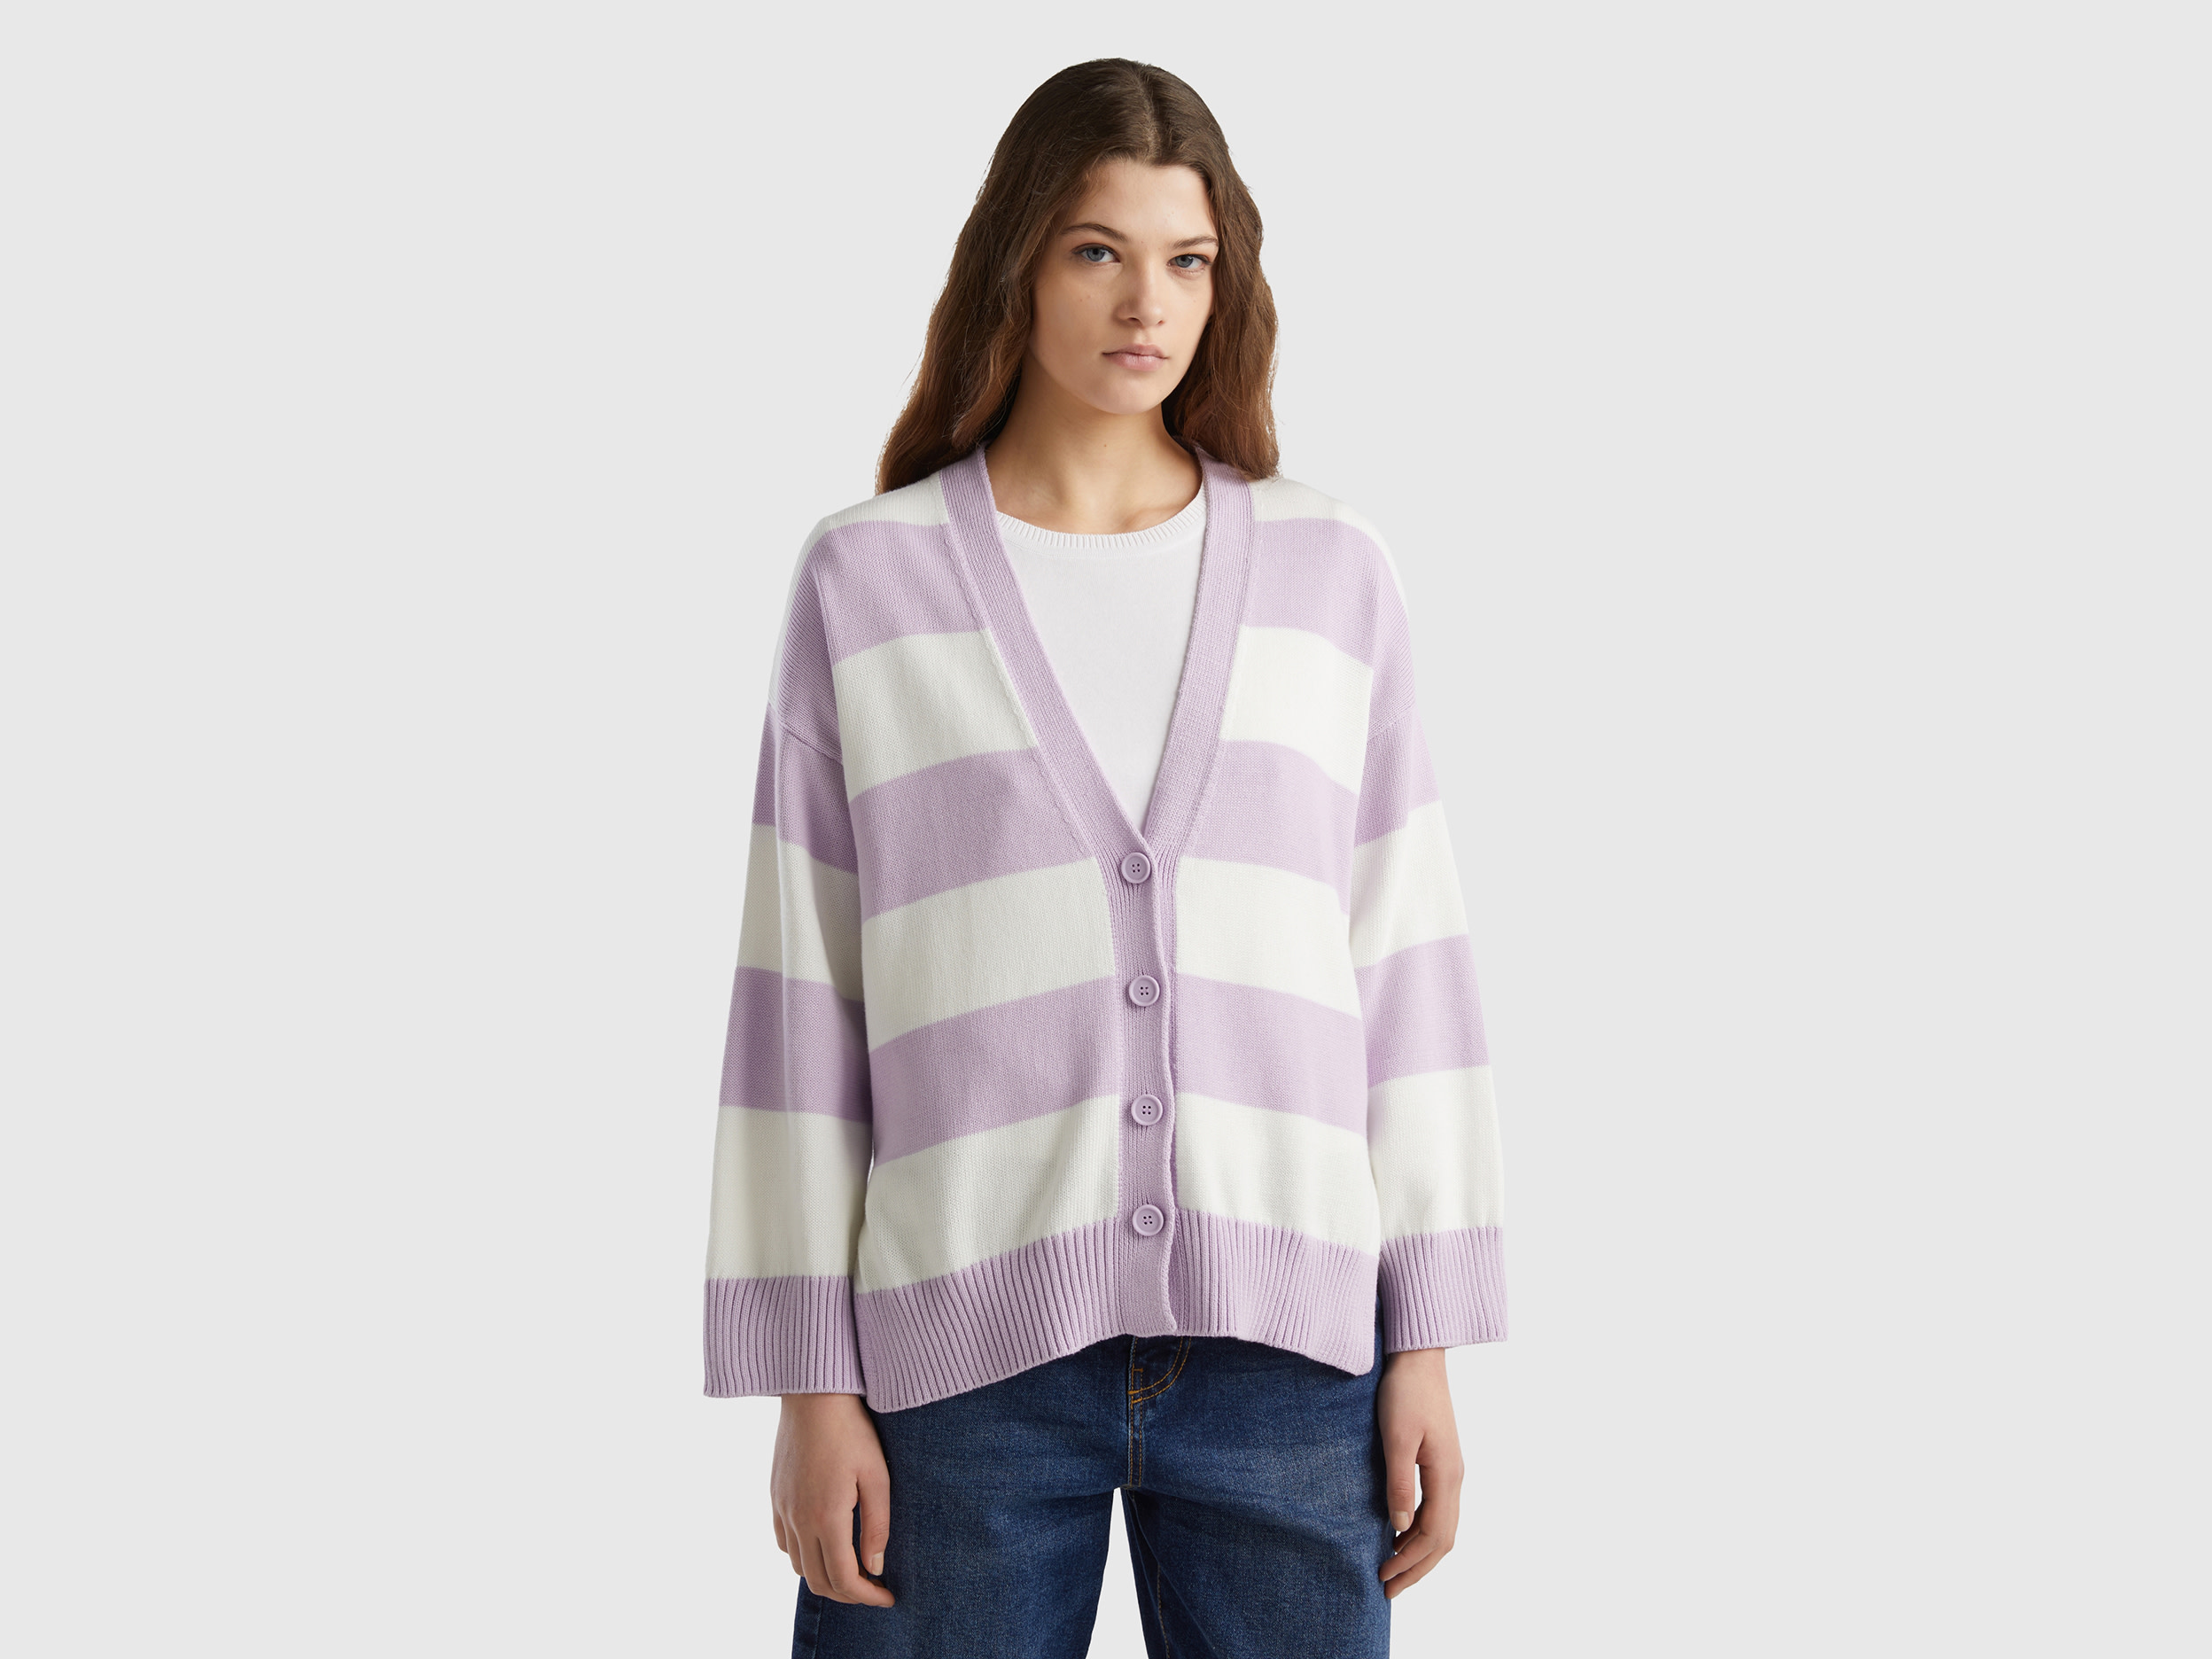 Benetton, Striped Cardigan In Tricot Cotton, size M, Lilac, Women